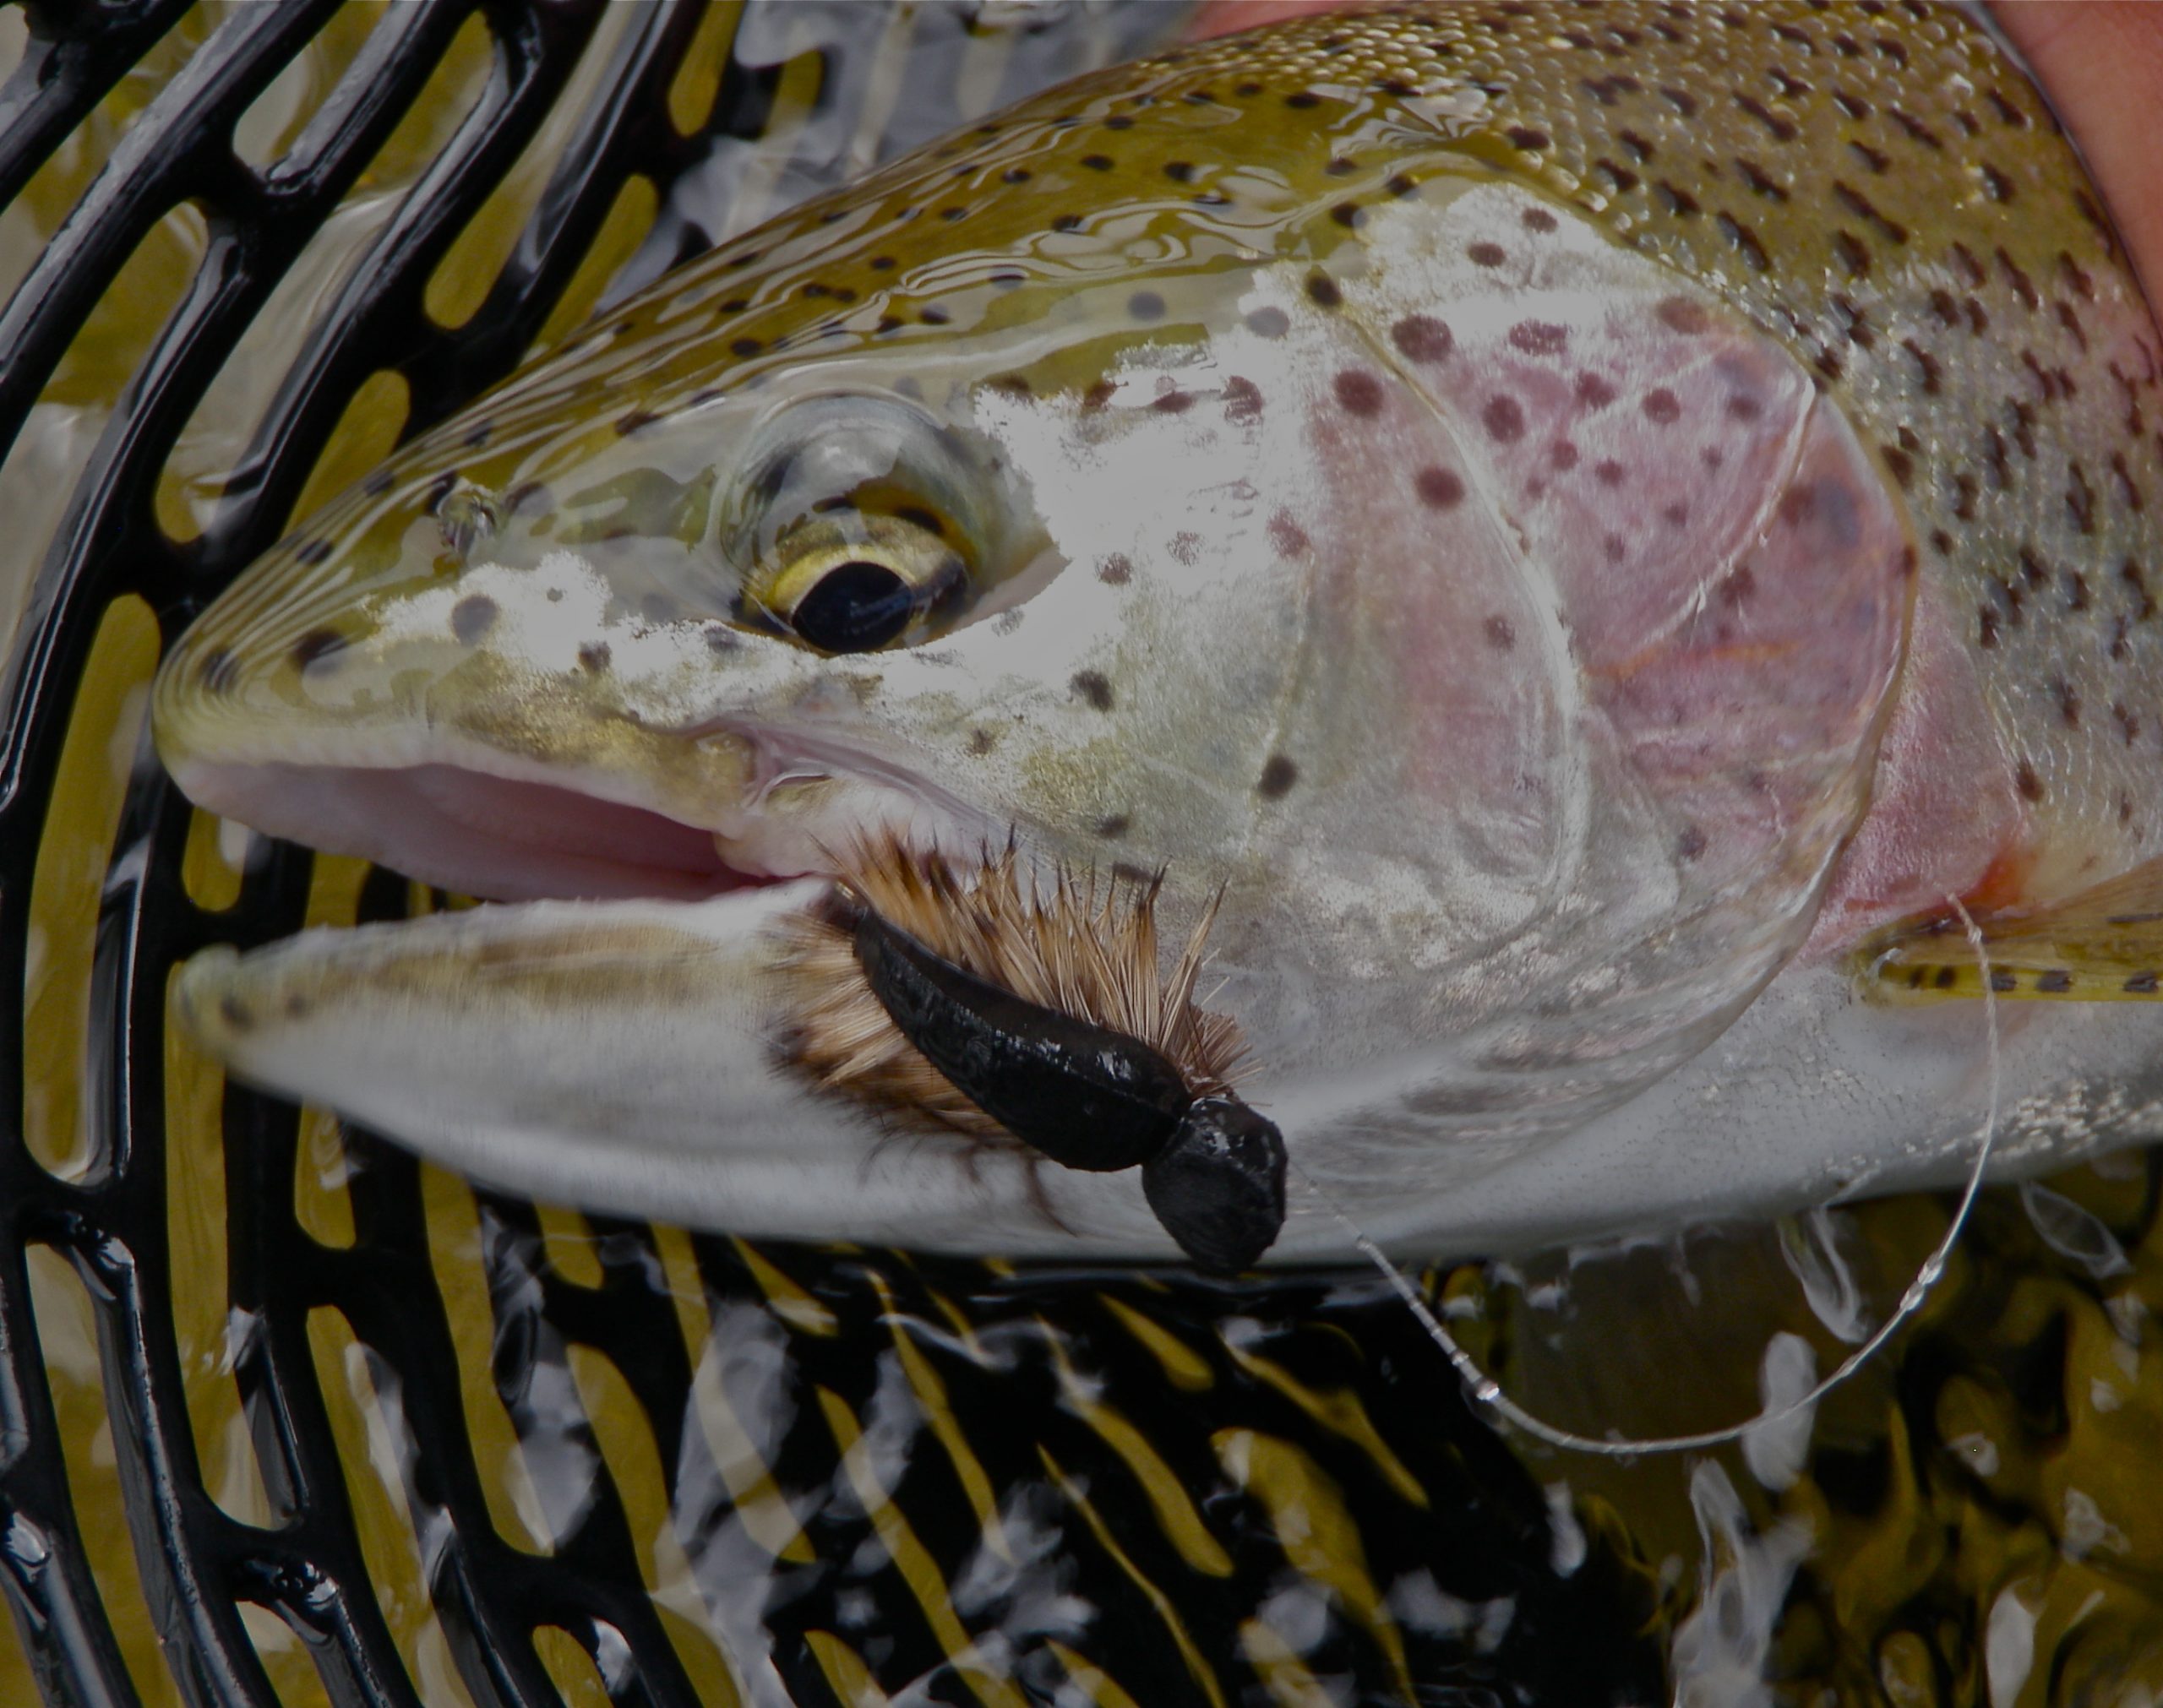 An image of an alaska trout fishing adventure with Outgoing Angling